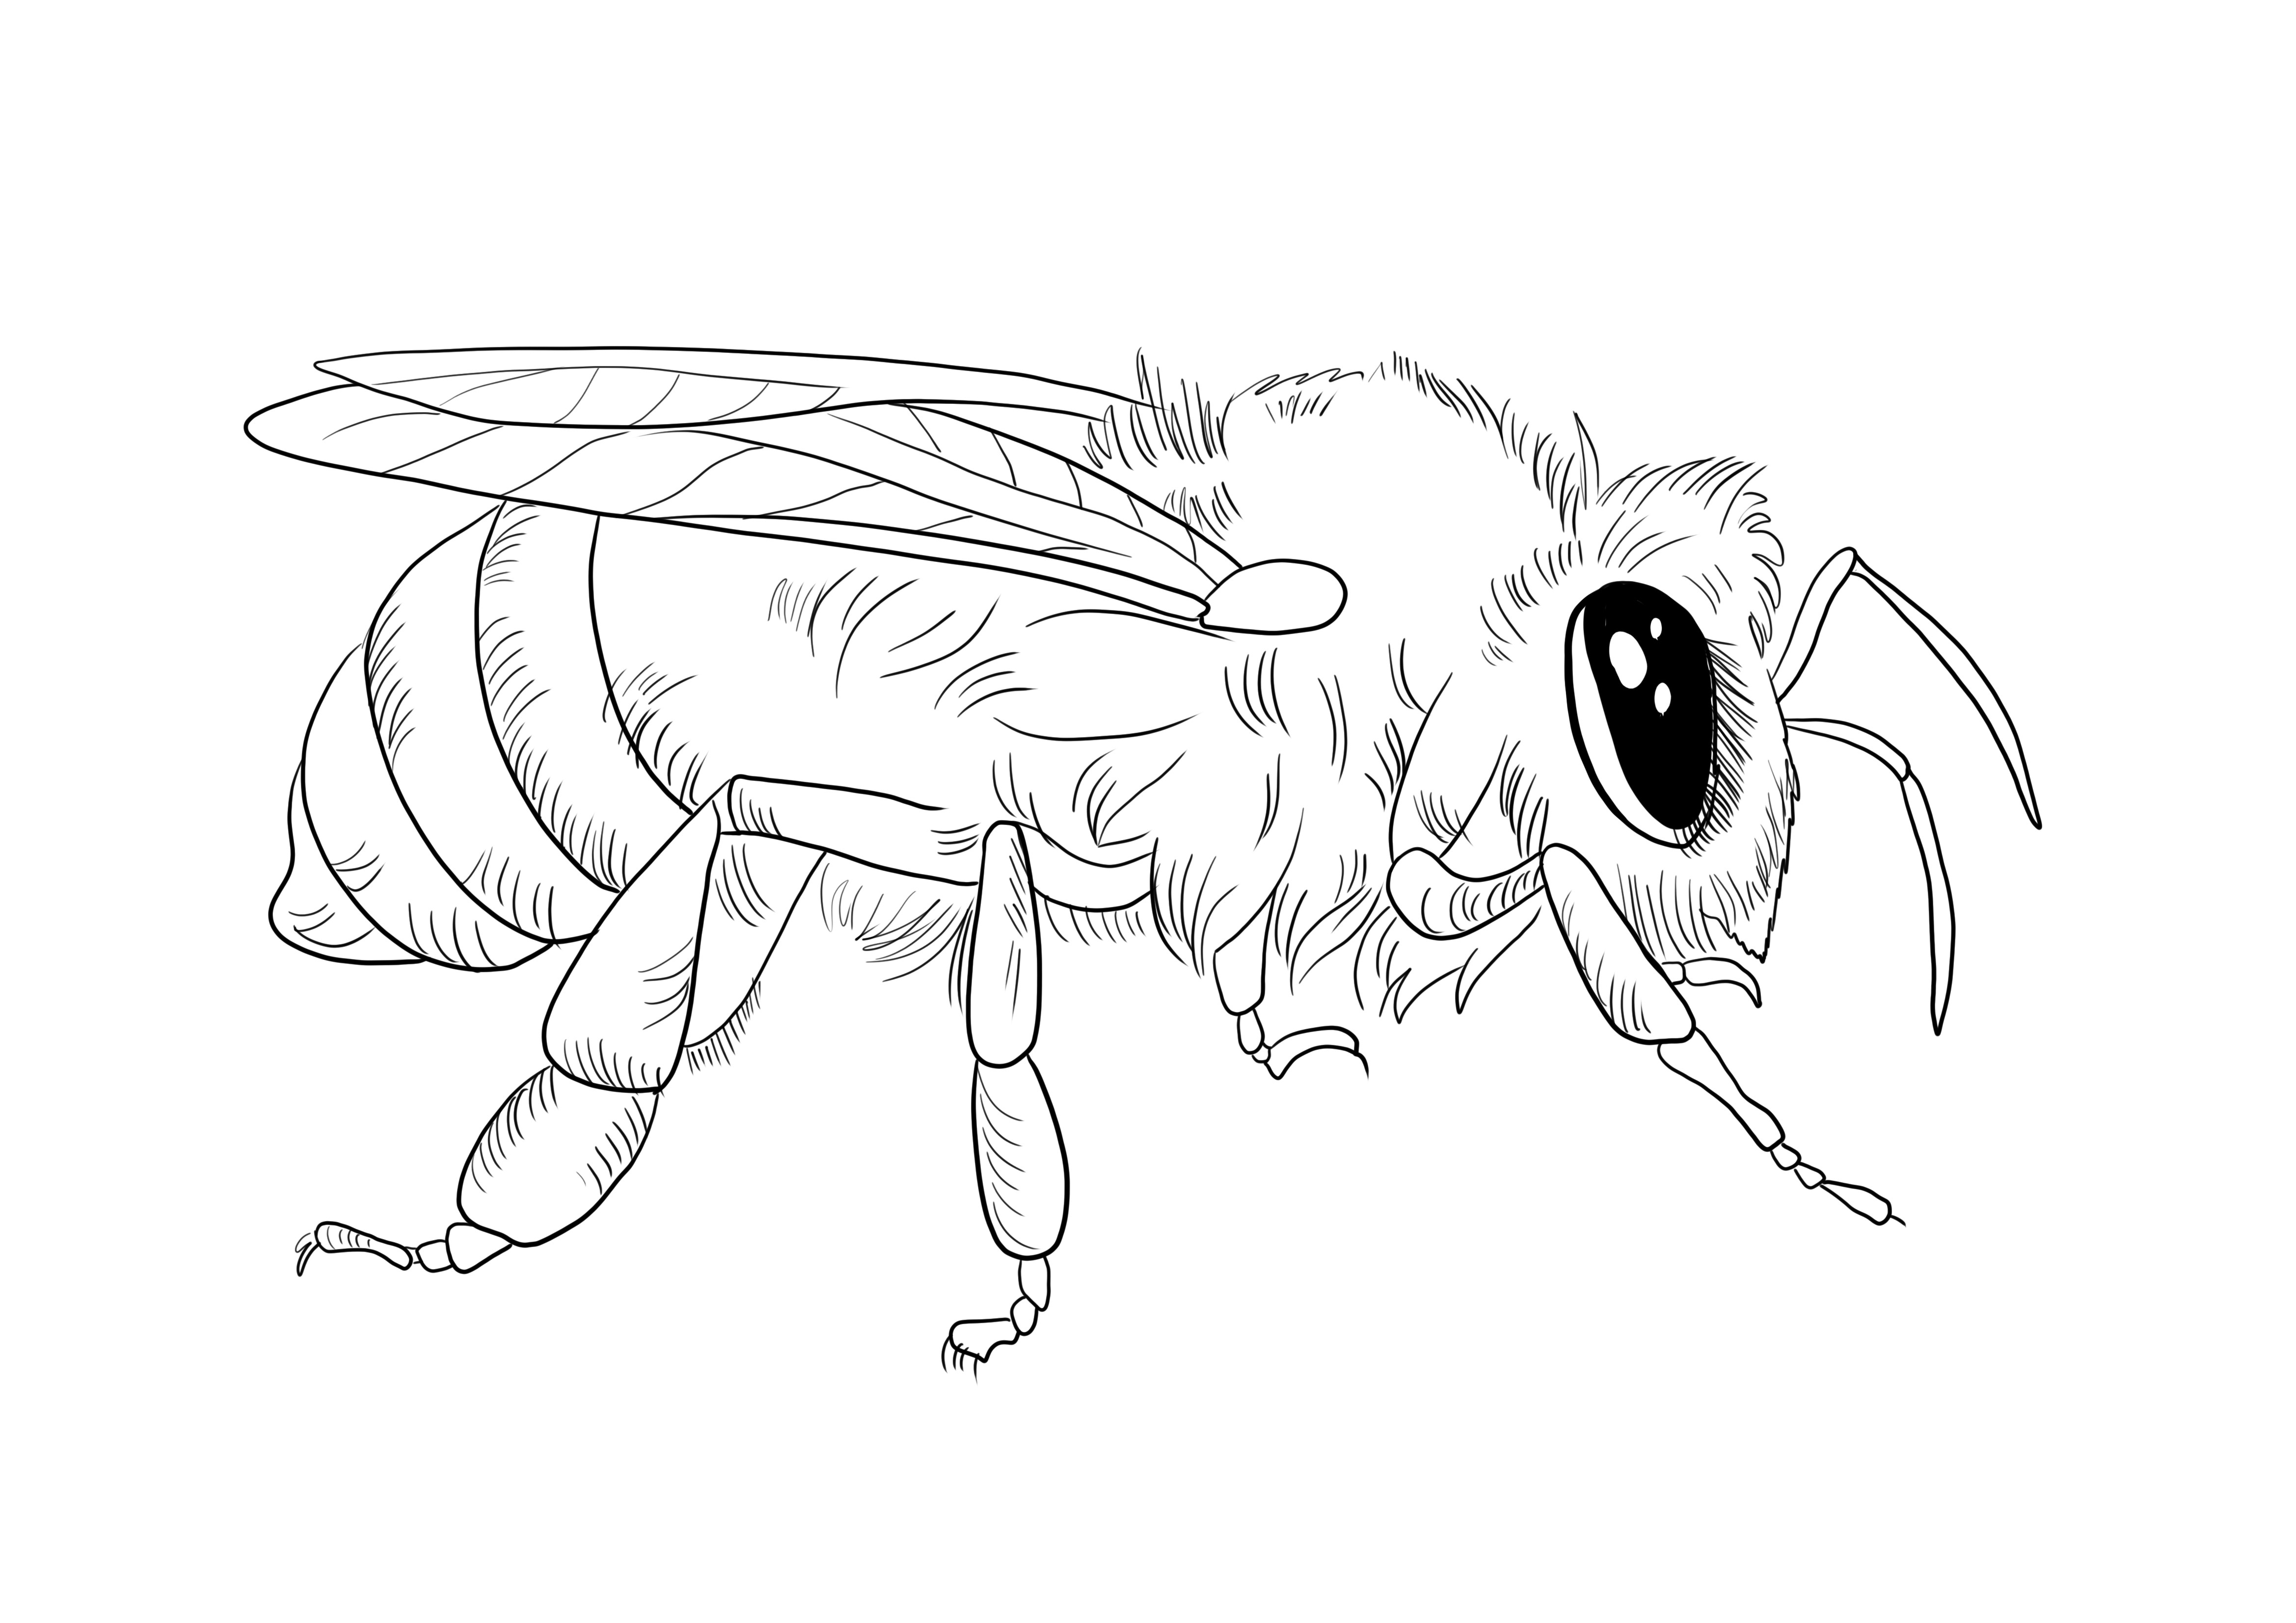 Honey bee to color and print or download for free